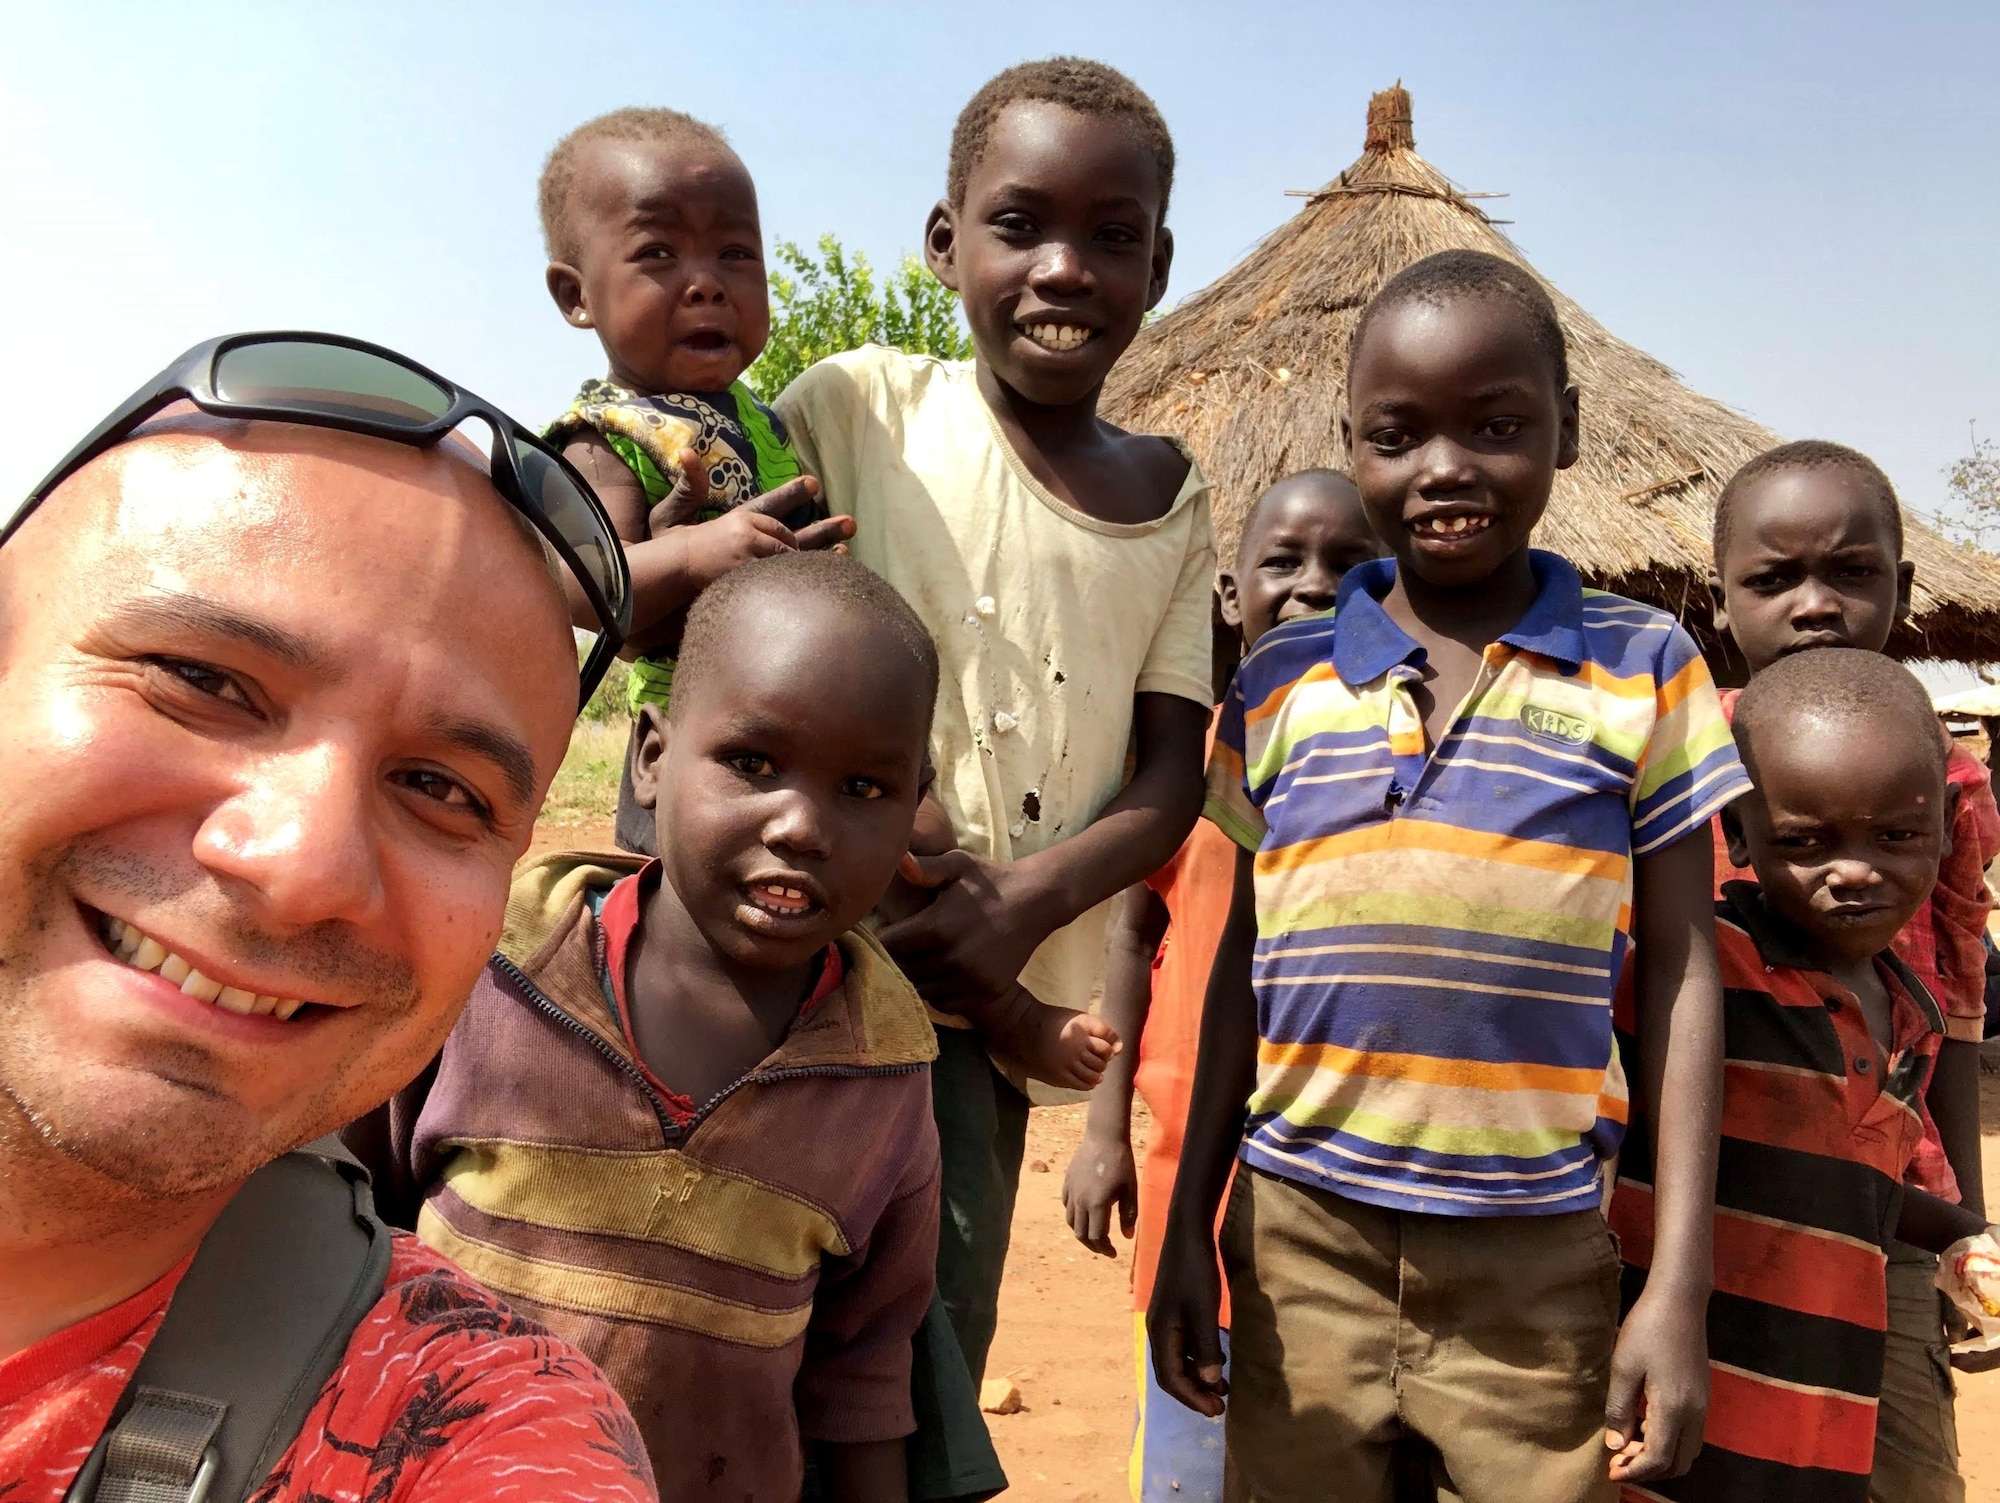 Chaplain (Capt.) Benjamin Quintanilla, assigned to the 28th Bomb Wing, visits with children on a trip to Adjumani, Uganda, in January 2019. Quintanilla visited Adjumani to work alongside Tutapona, an organization that provides trauma rehabilitation to refugees. (Courtesy photo by Candice Lassey)